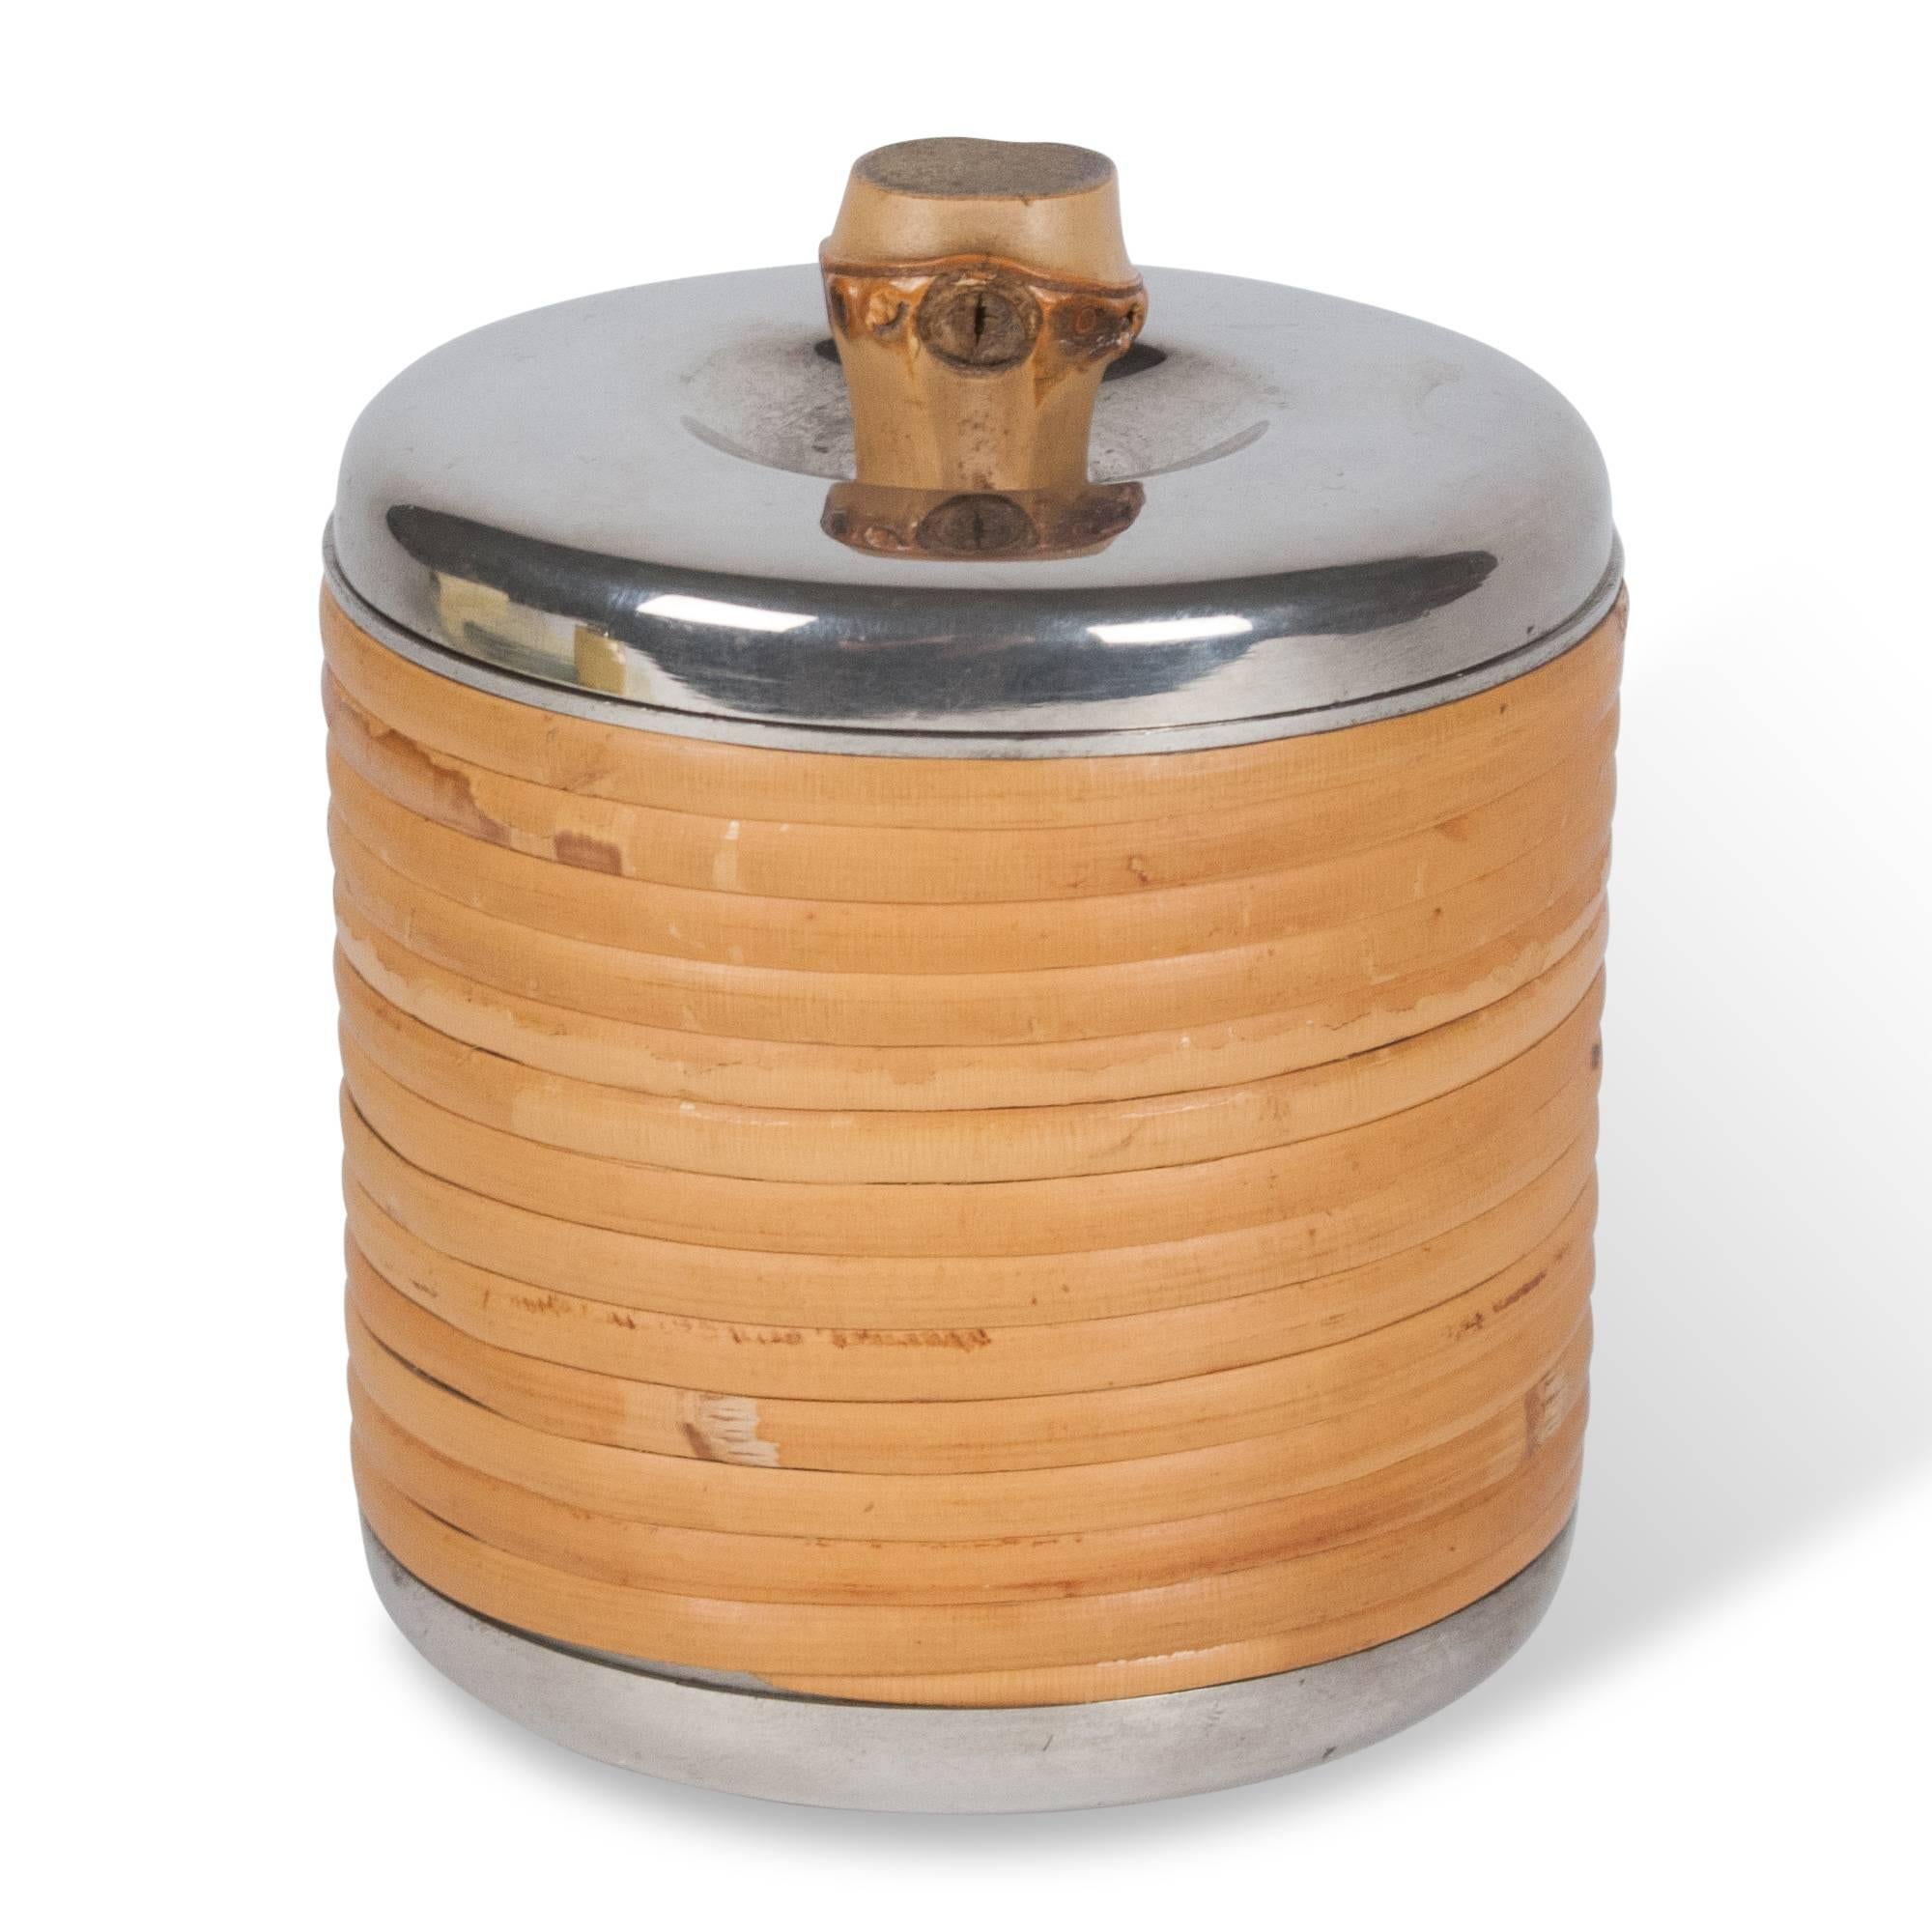 Stainless steel cylindrical lidded box, rattan wrapped with bamboo handle by Carl Auböck, Austria, 1950s. Measures: Height 3 3/4 in, diameter 3 3/8 in.